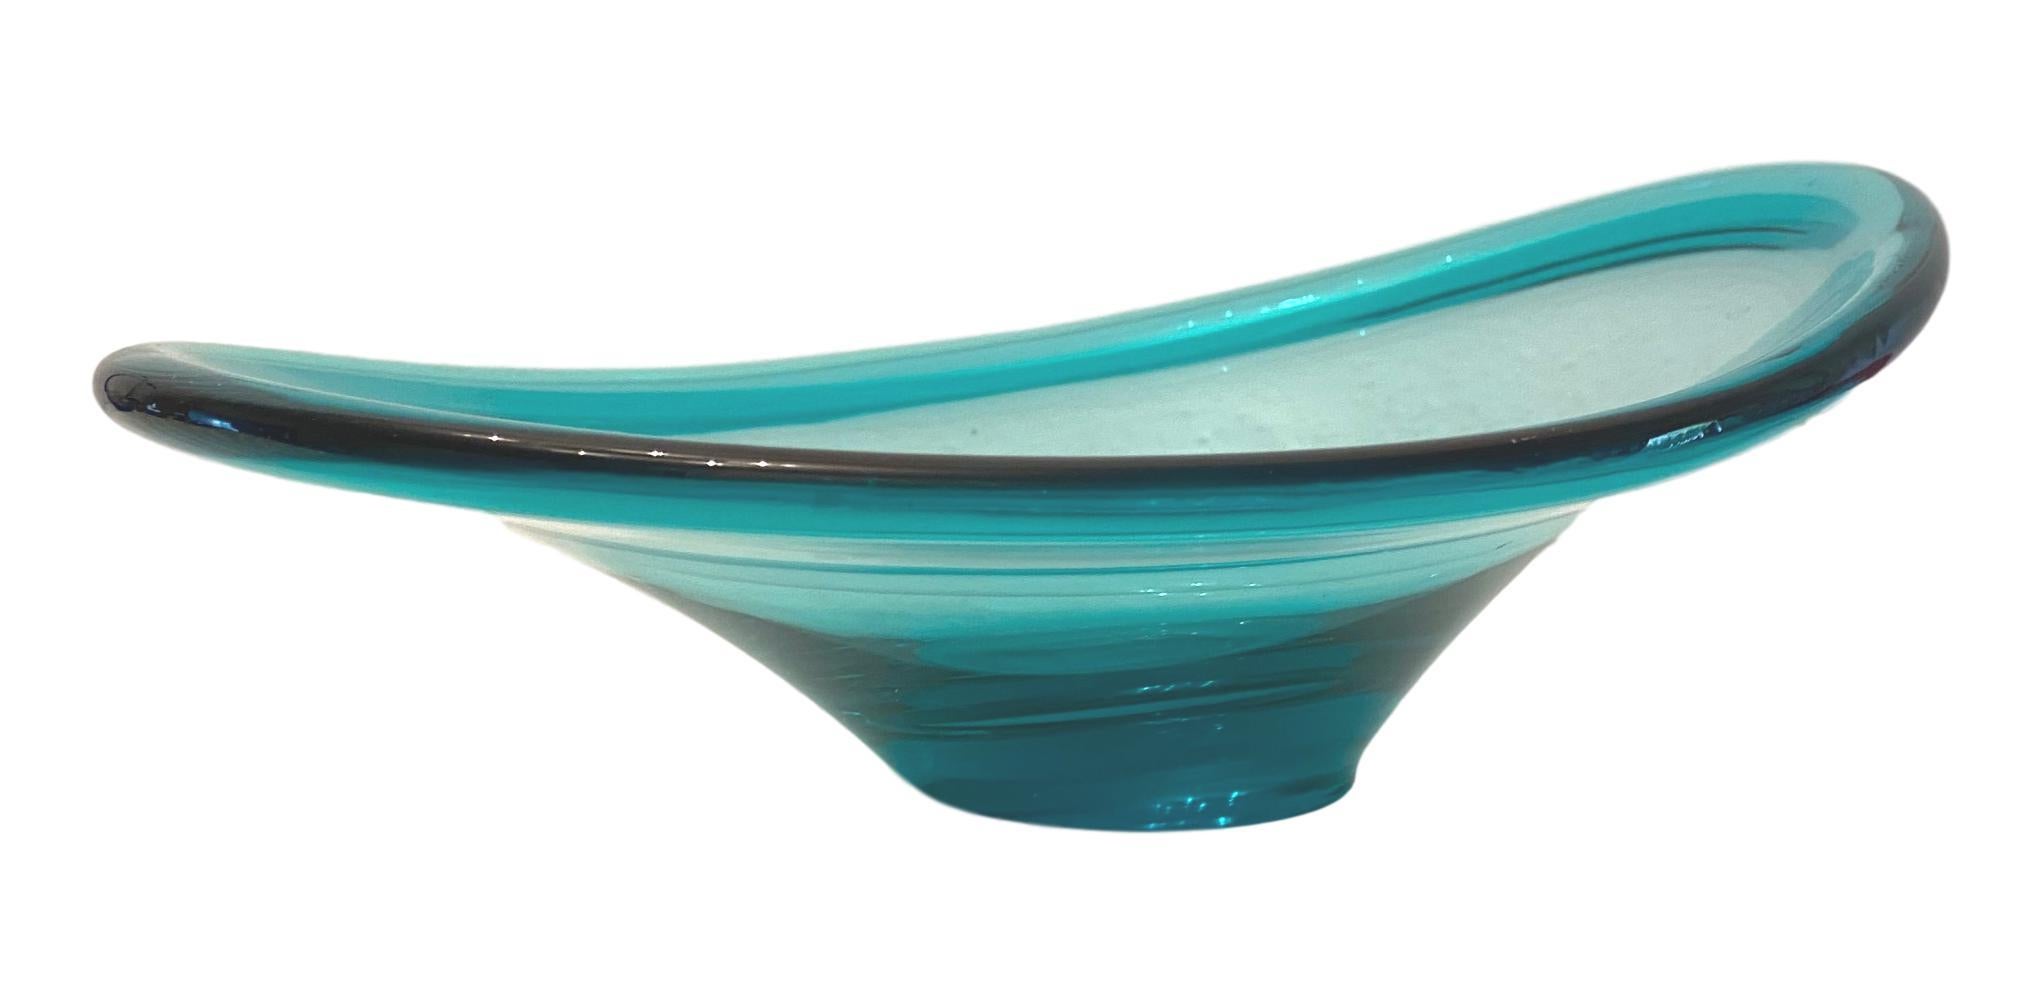 Gorgeous hand blown Murano art glass piece with Sommerso and bullicante techniques. A beautiful organic shaped bowl or catchall in turquoise green-blue color, Italy, 1980s.